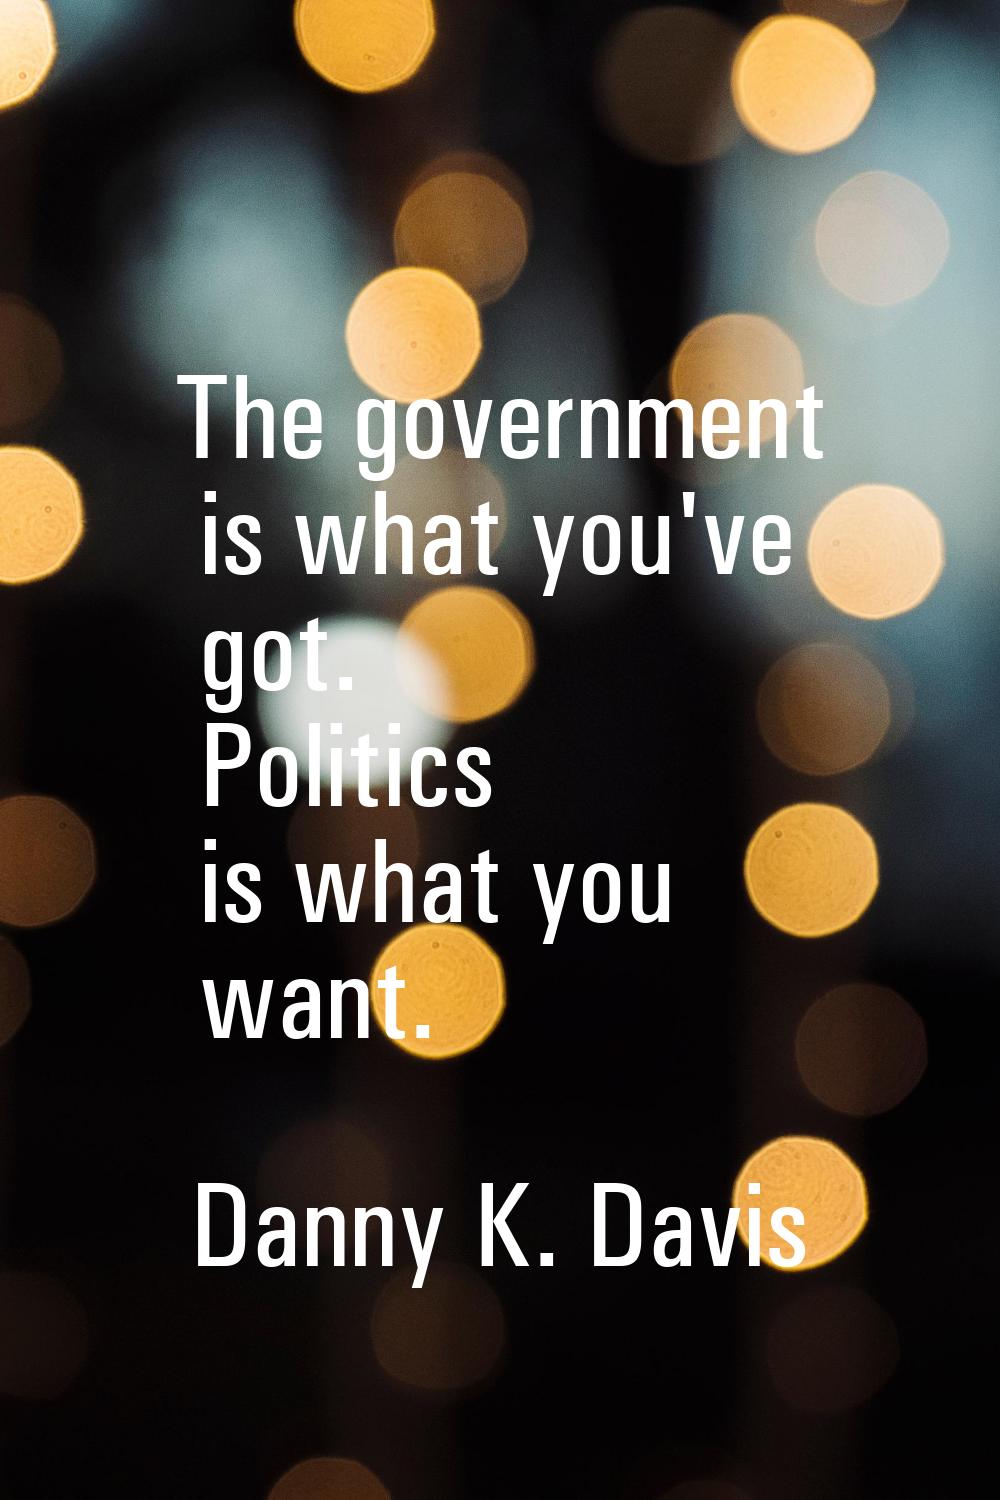 The government is what you've got. Politics is what you want.